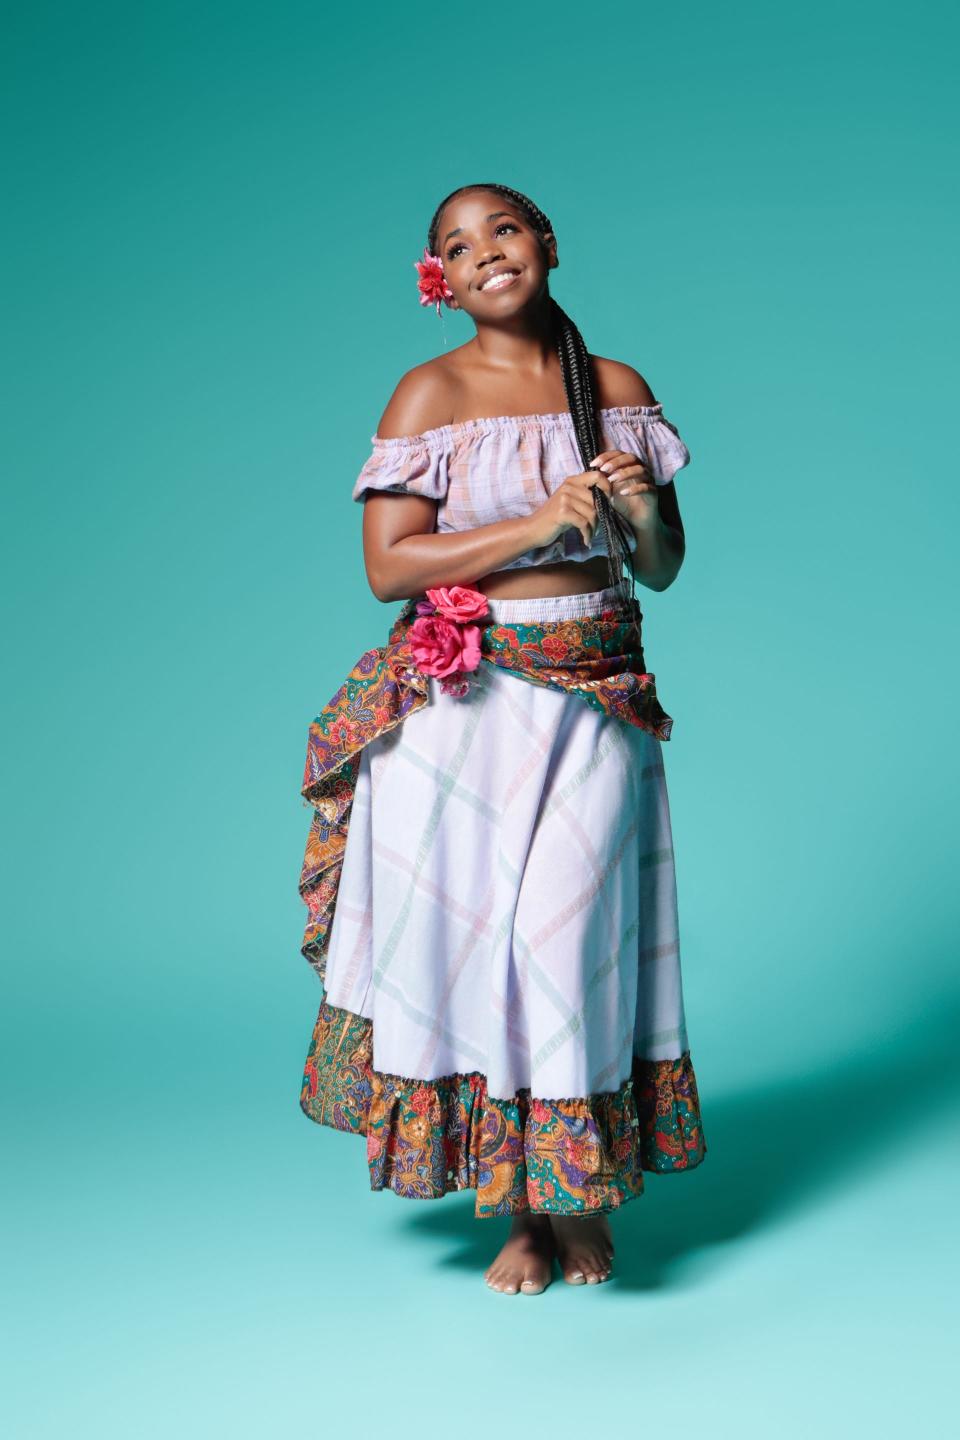 Ilexis Holmes makes her Westcoast Black Theatre Troupe debut in “Once On This Island,” as a young woman who goes on a journey for love across a Caribbean island.